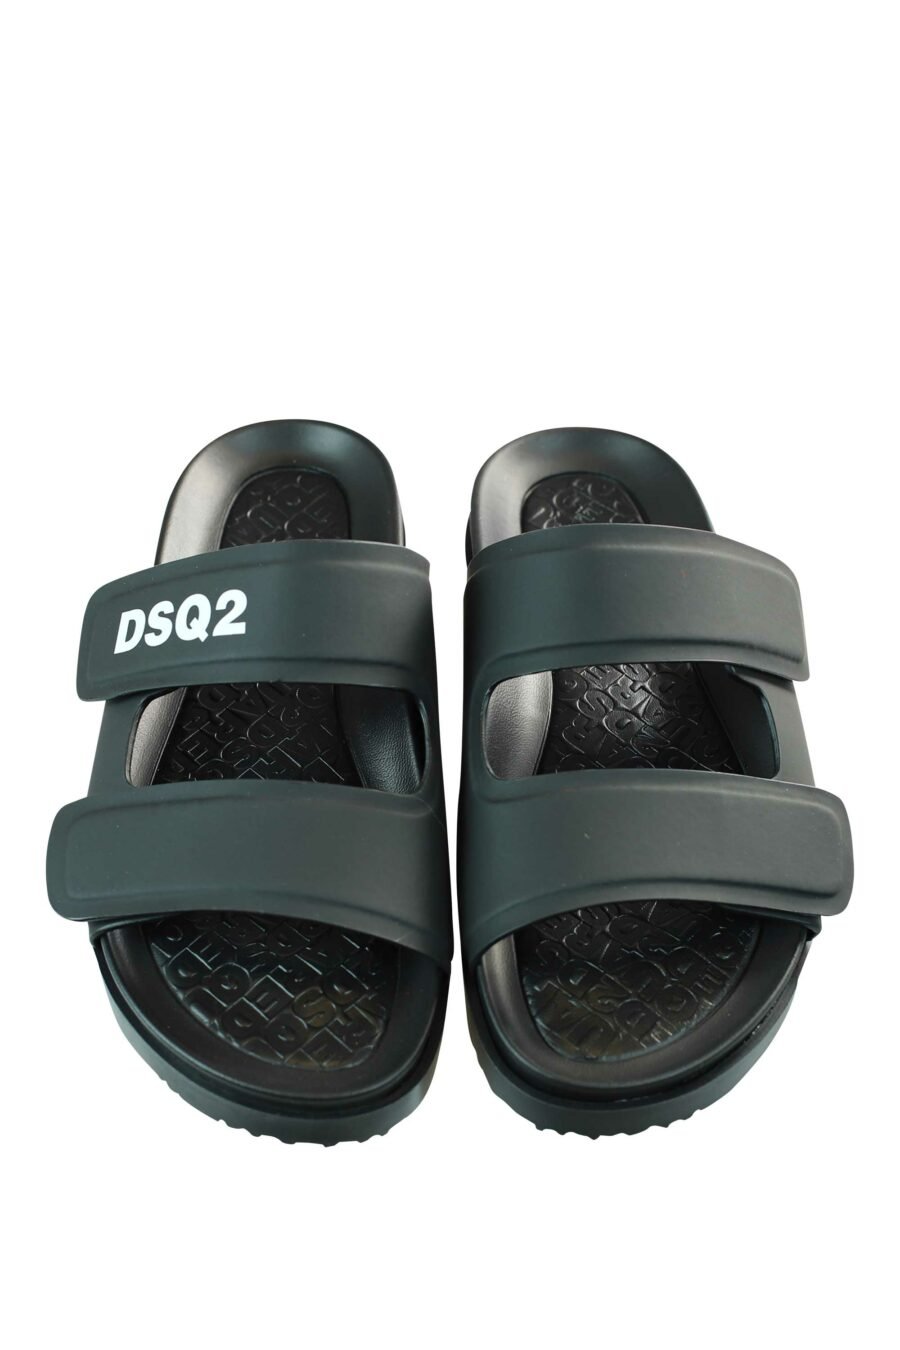 Black sandals with white "dsq2" logo and velcro - 8055777203200 4